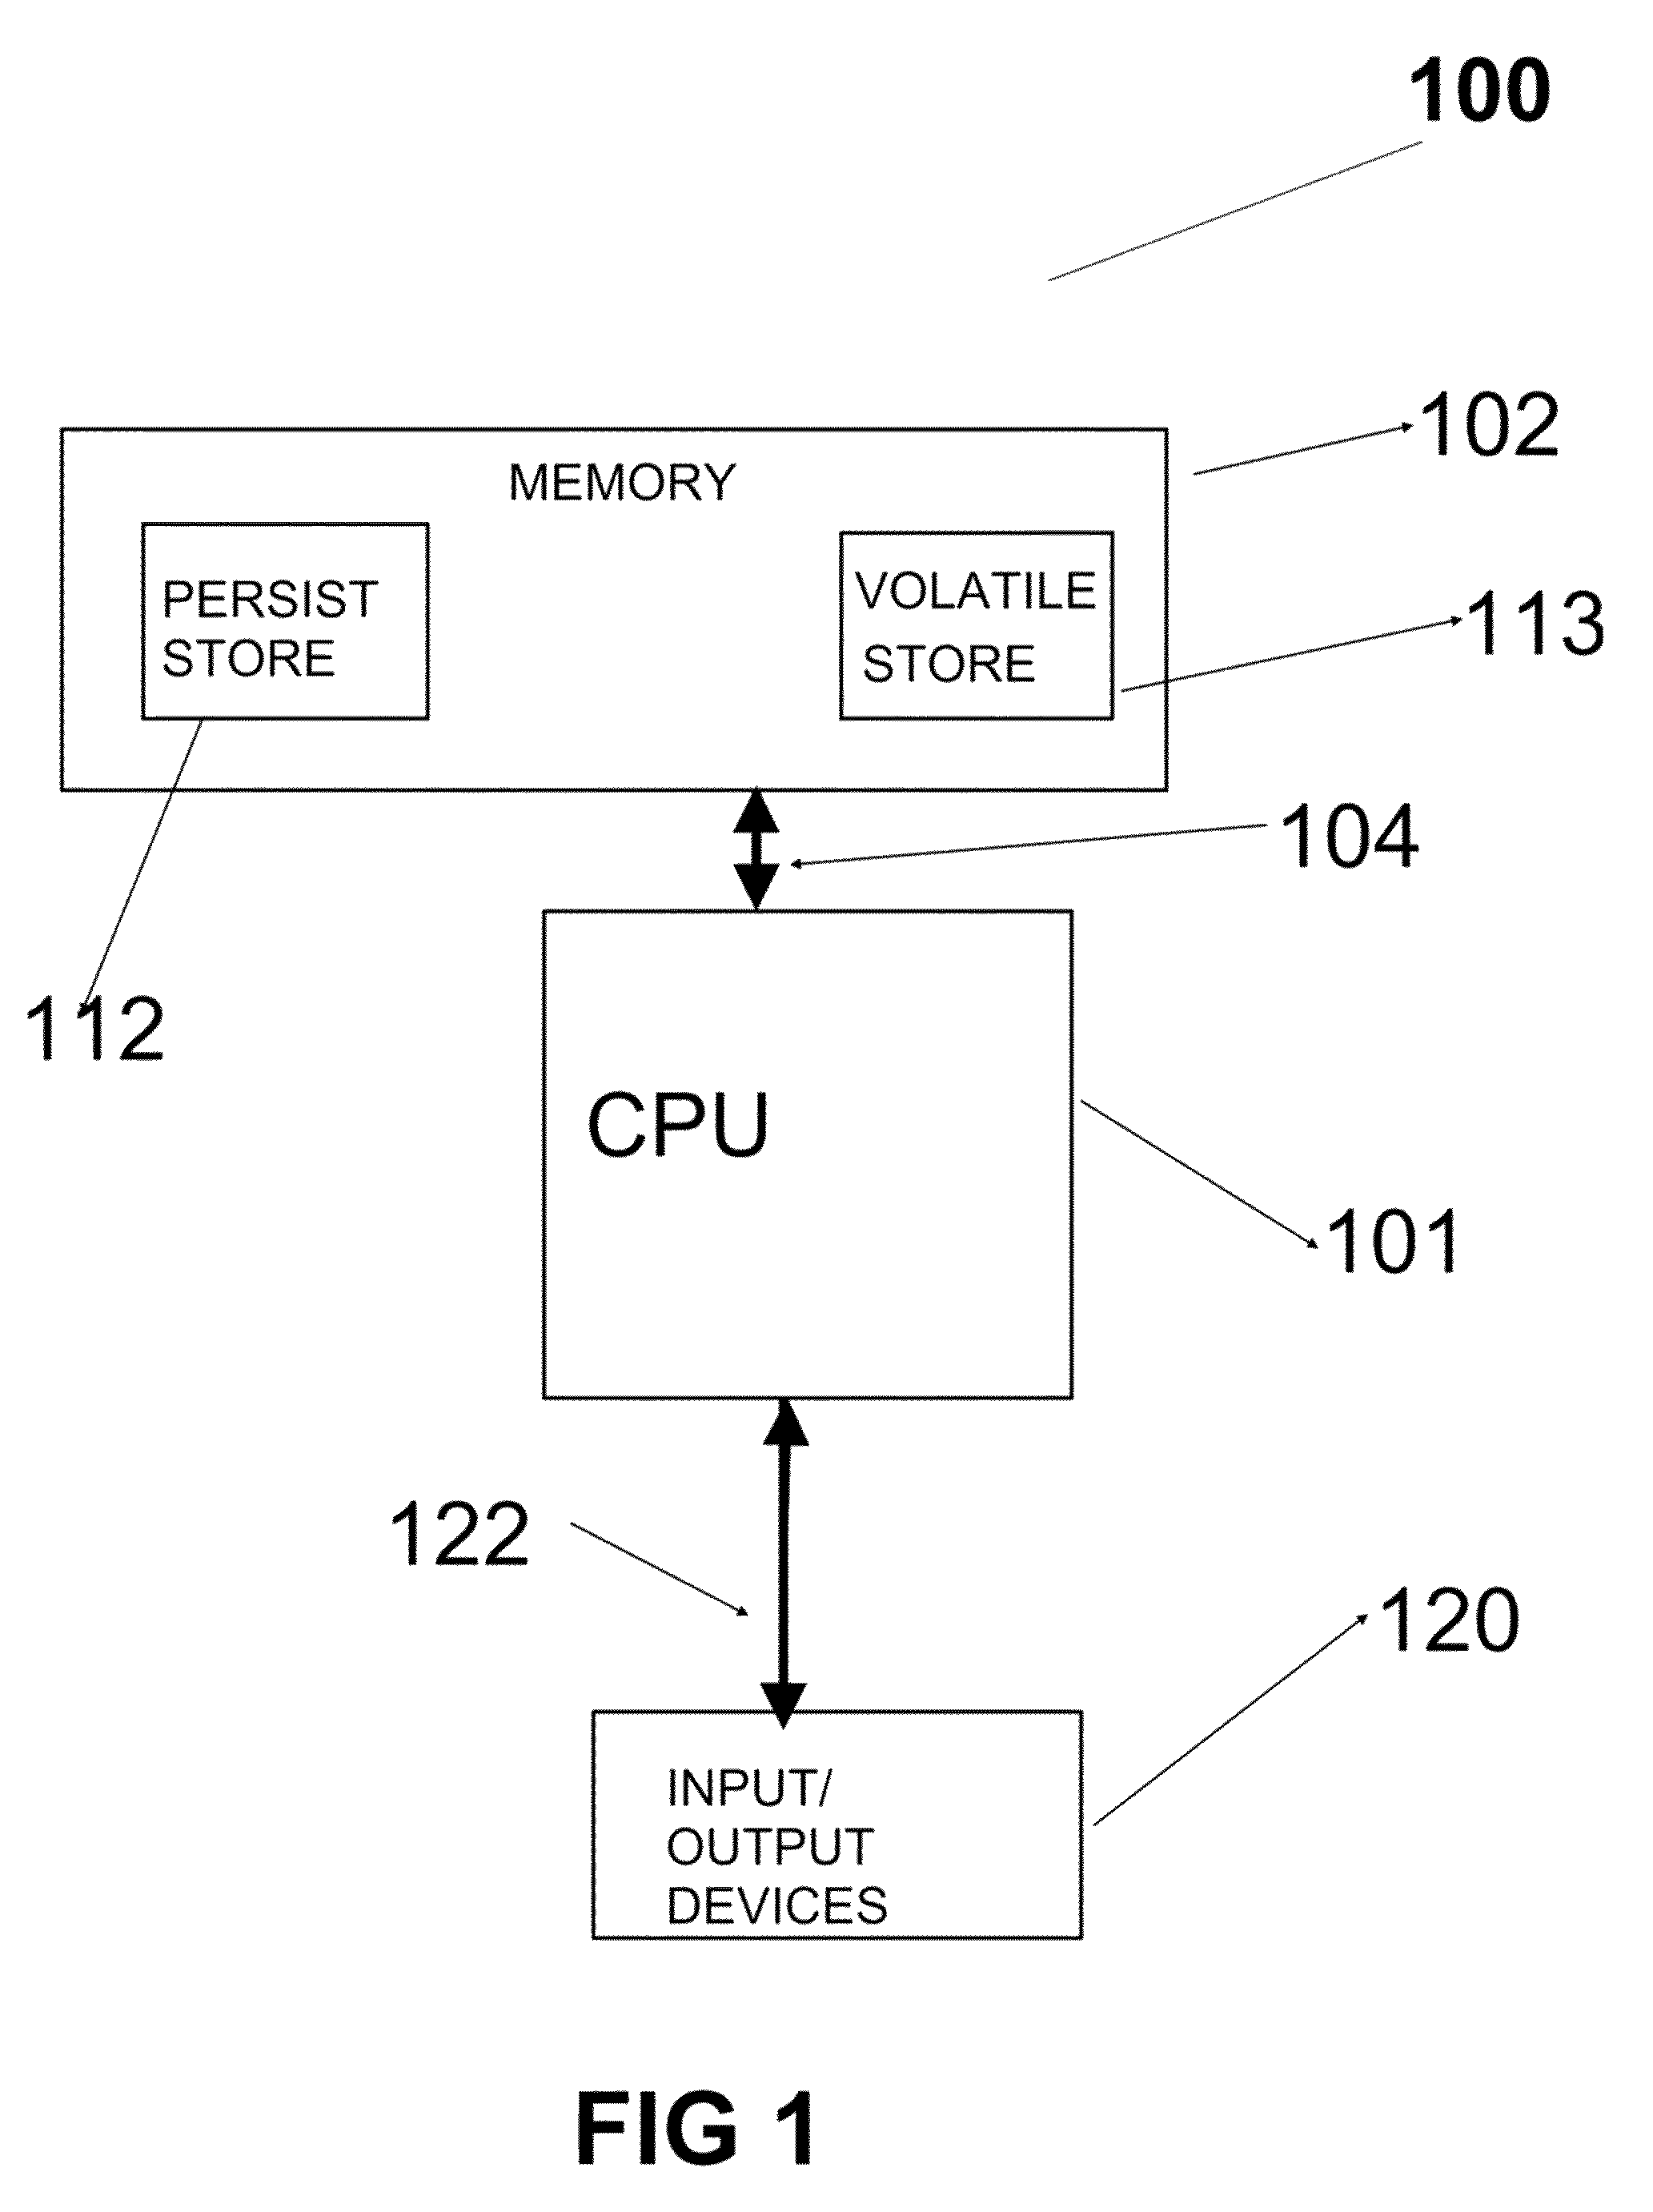 System and methods for migrating independently executing program into and out of an operating system